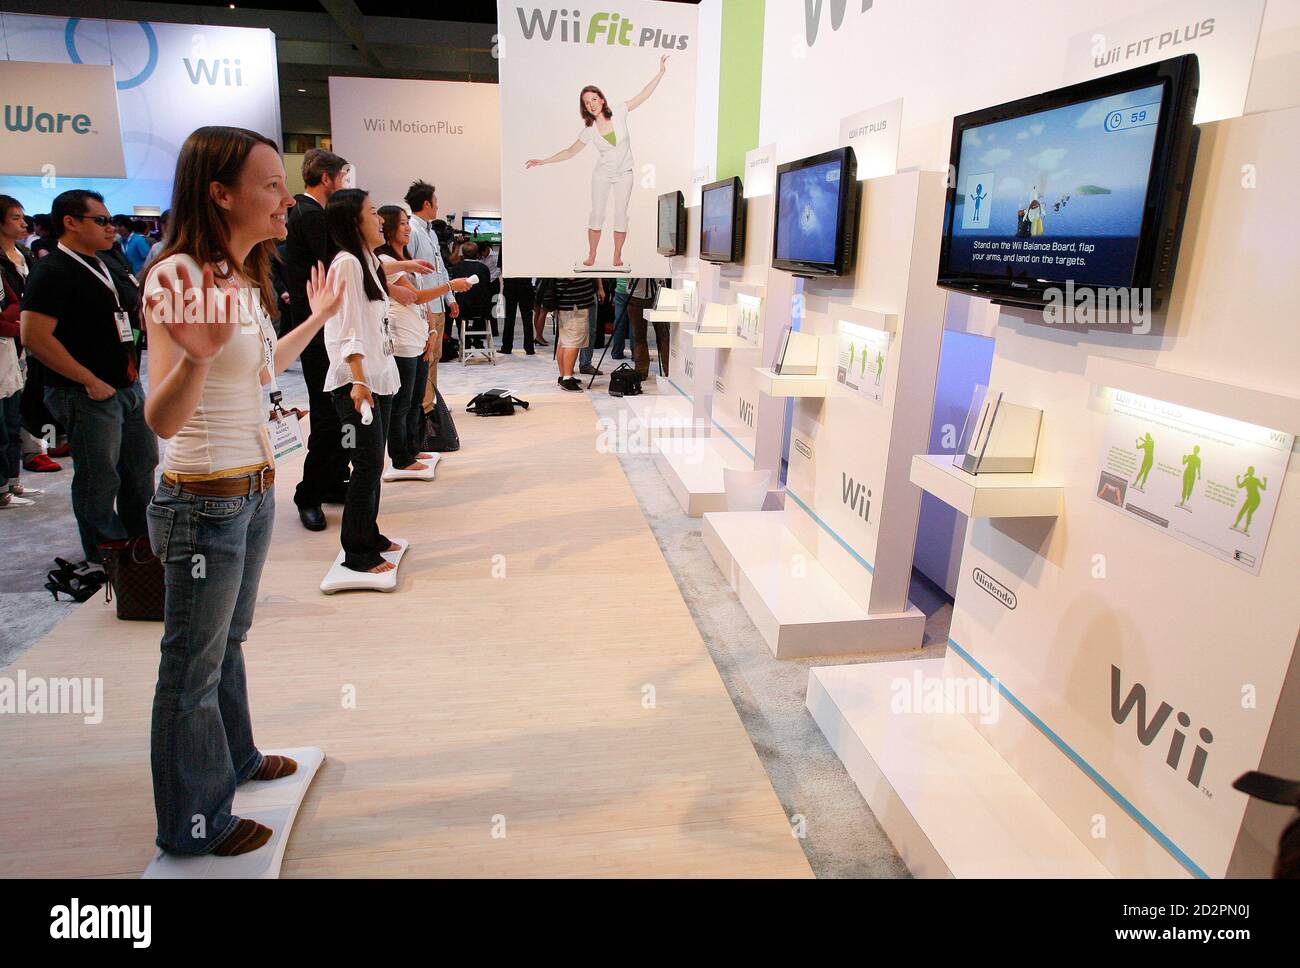 Visitors step on Nintendo Wii Balance Boards as they play the new Wii Fit  Plus game during the Electronic Entertainment Expo or E3 in Los Angeles  June 2, 2009. REUTERS/Mario Anzuoni (UNITED